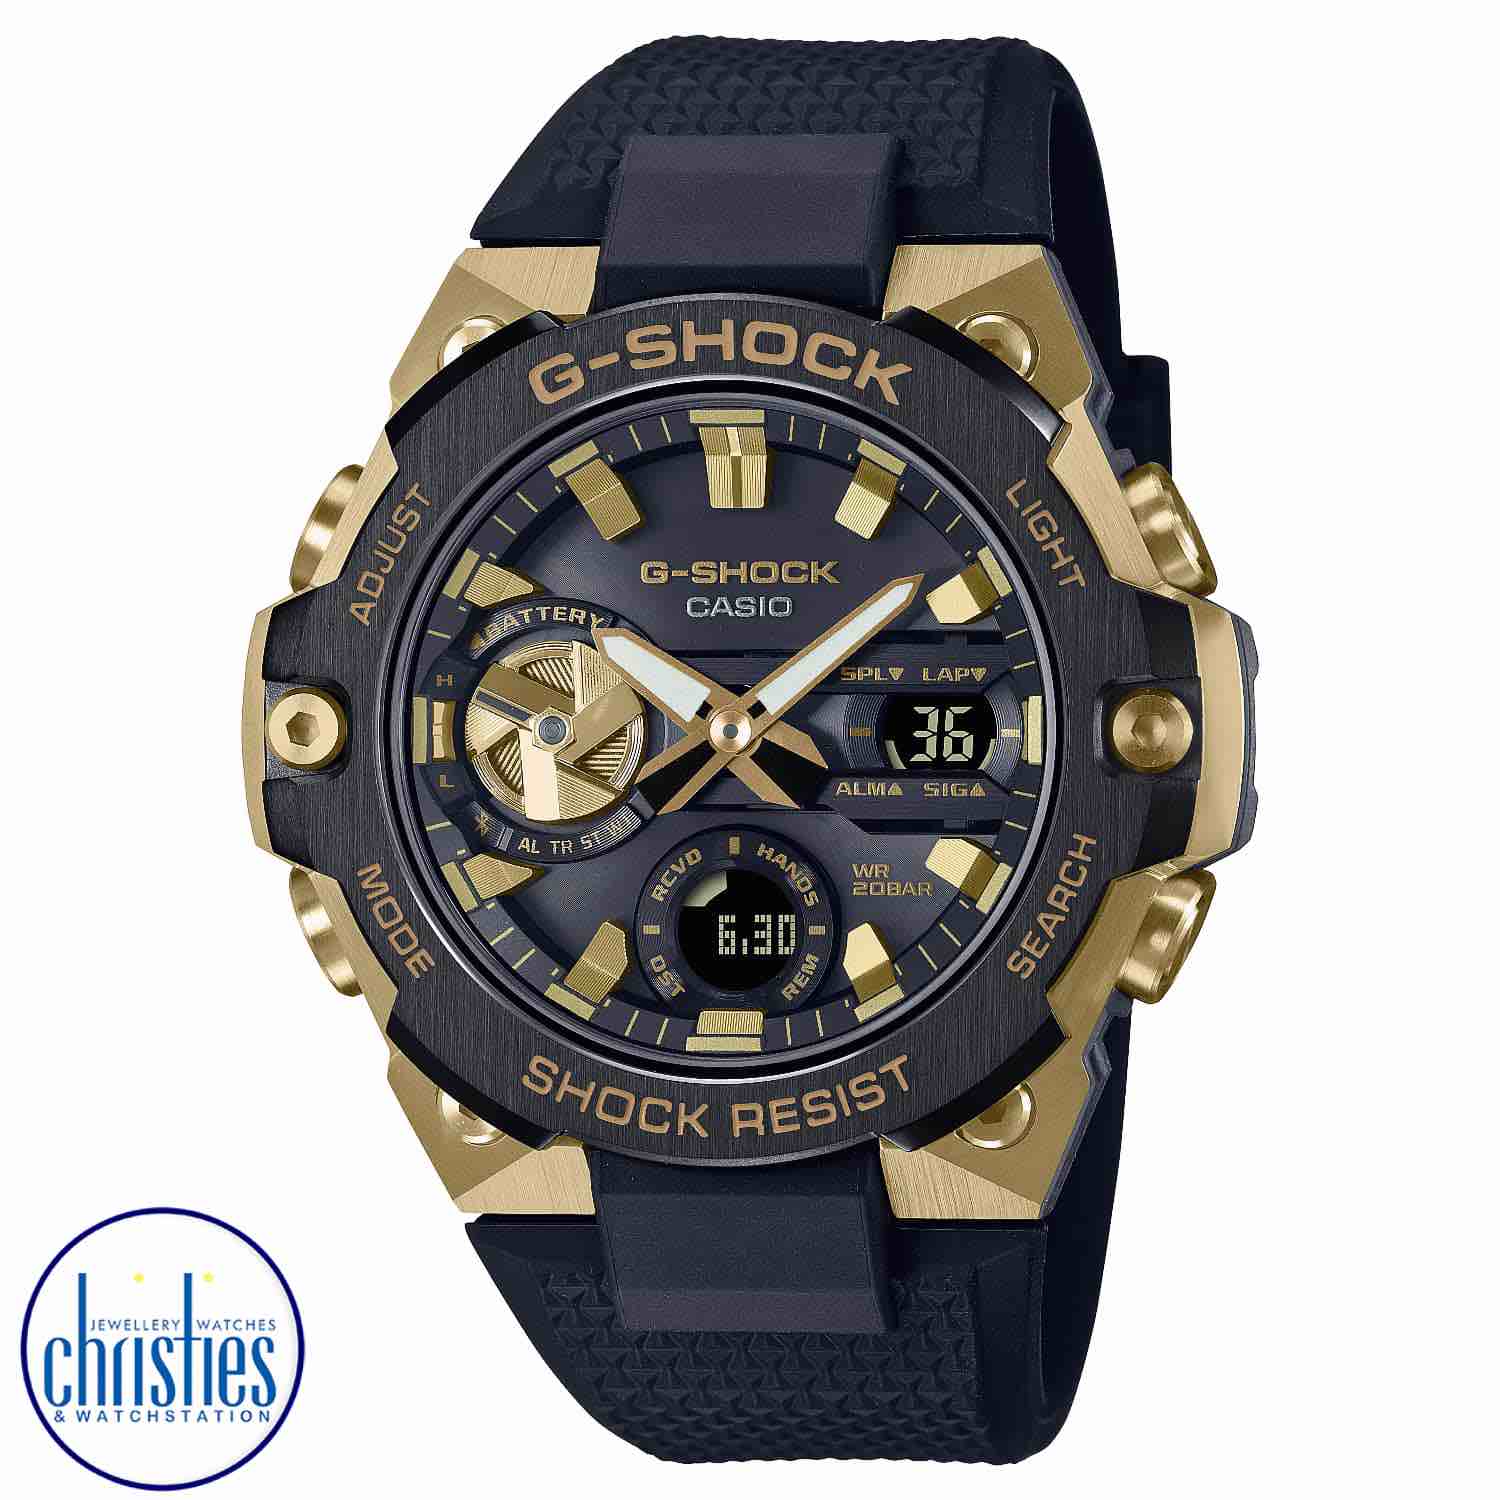 GSTB400GB-1A9 Casio G-Shock G-STEEL Watch. Revel in the eclectic G-STEEL combination of metal and resin components in an ever-popular colour scheme of black and gold.